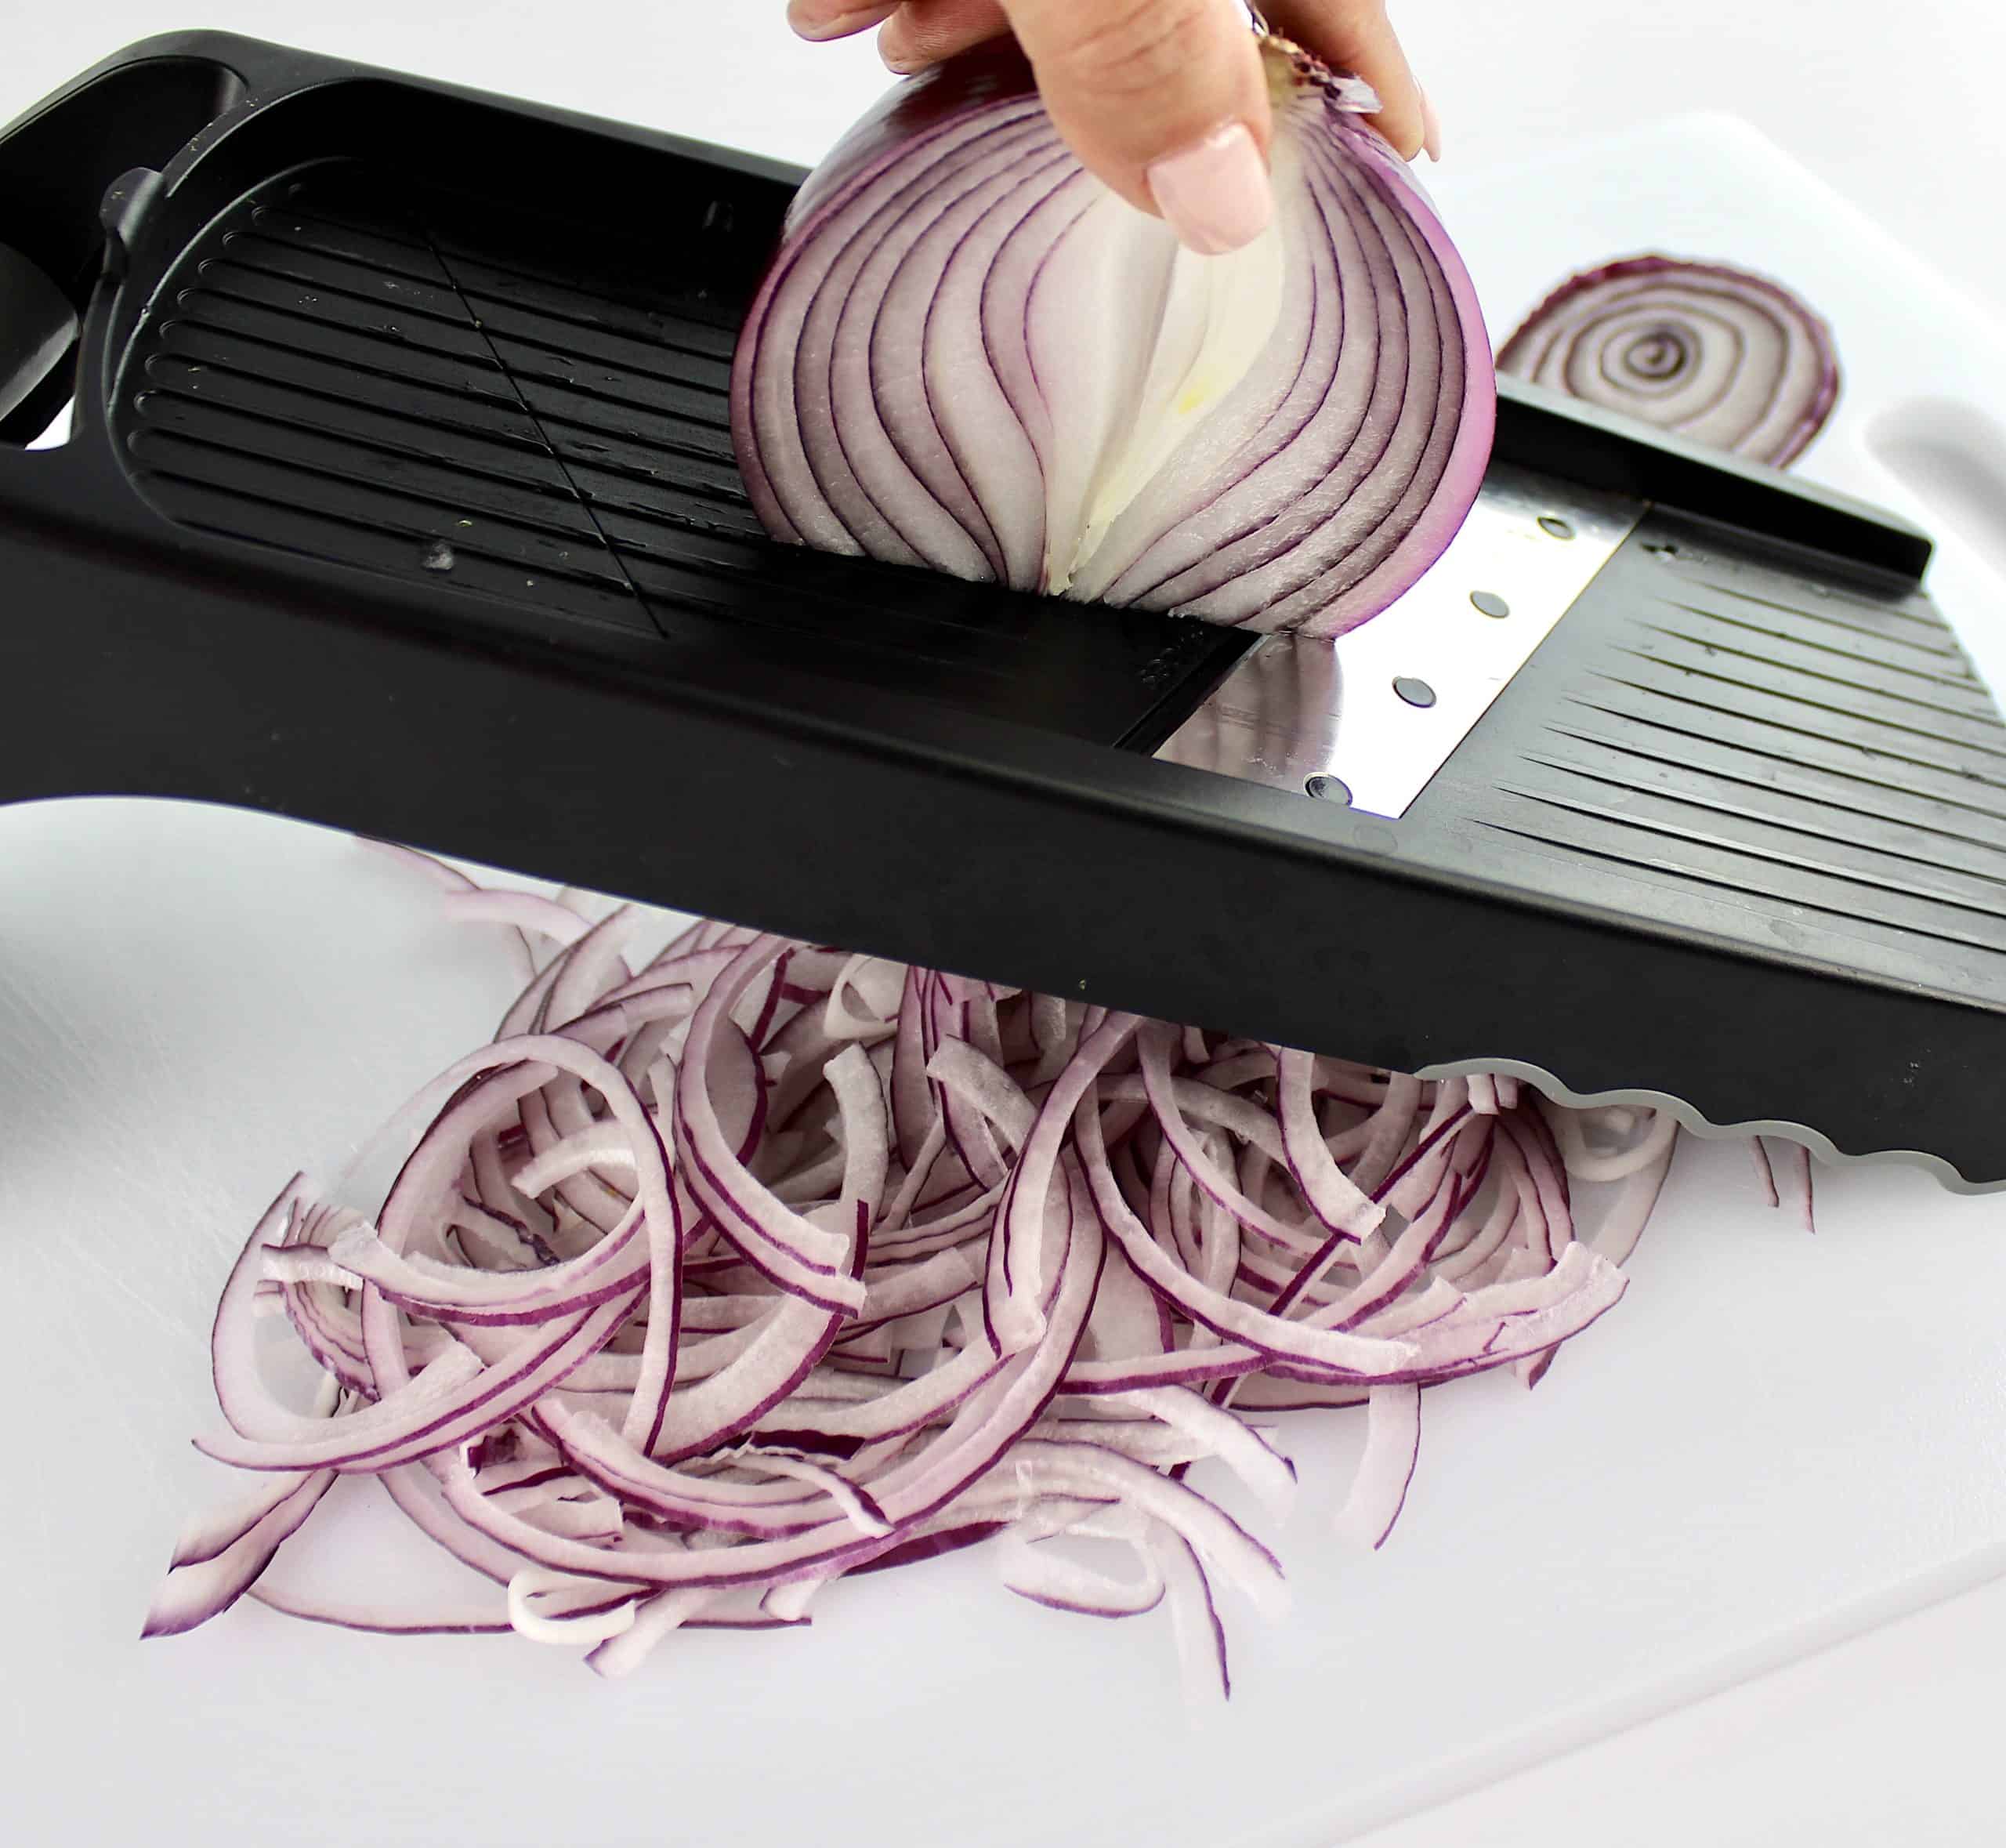 red onion being sliced on madolin